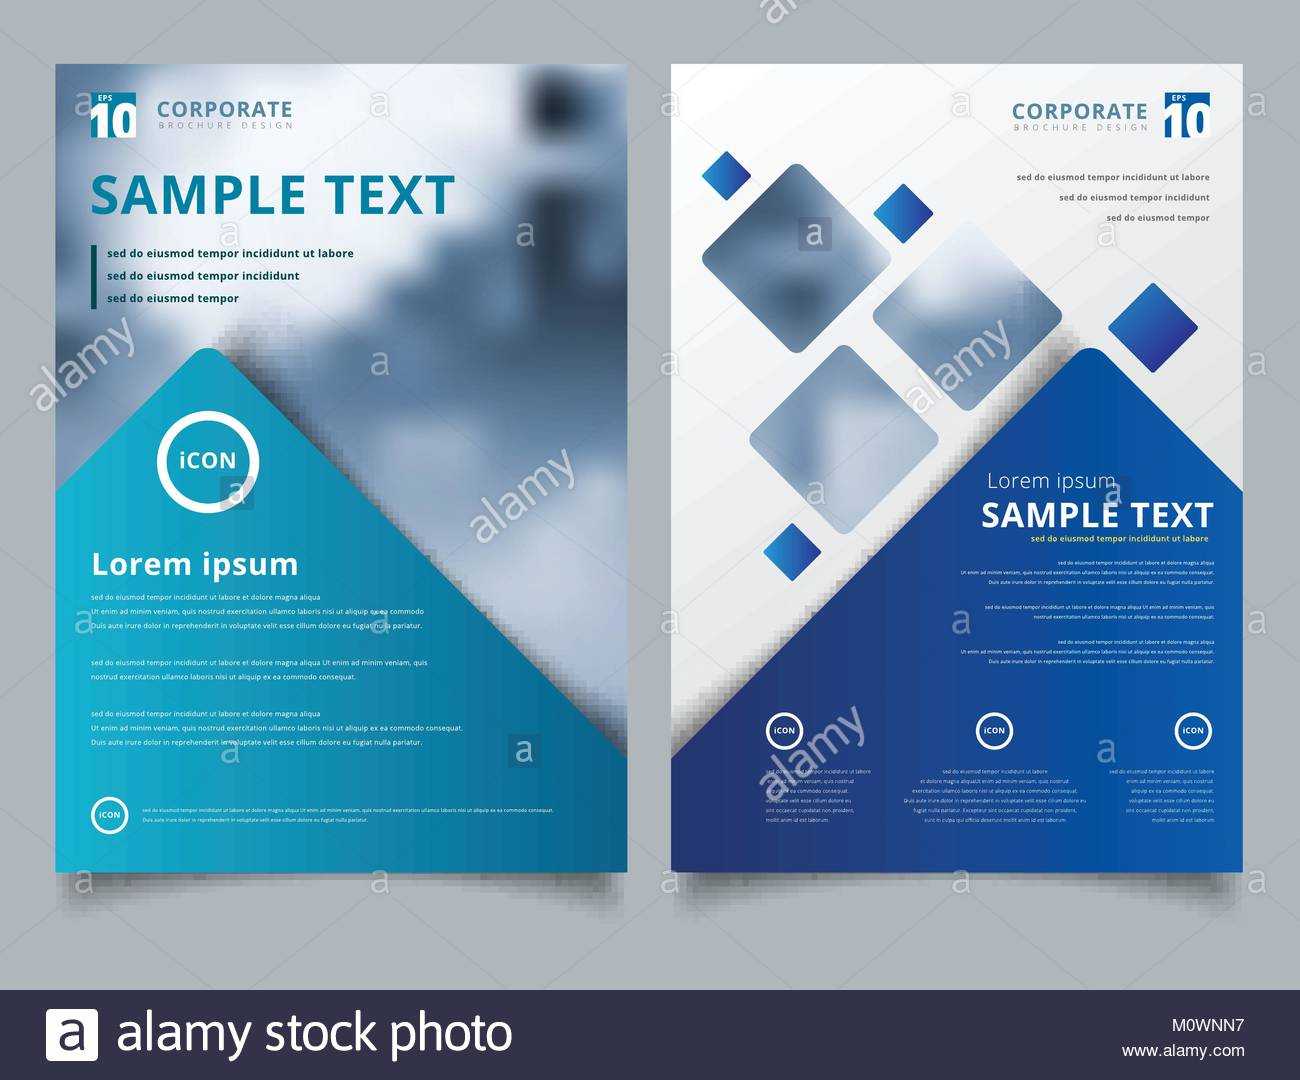 Free Poster Design Templates Illustrator With Scientific Pertaining To Free Illustrator Brochure Templates Download